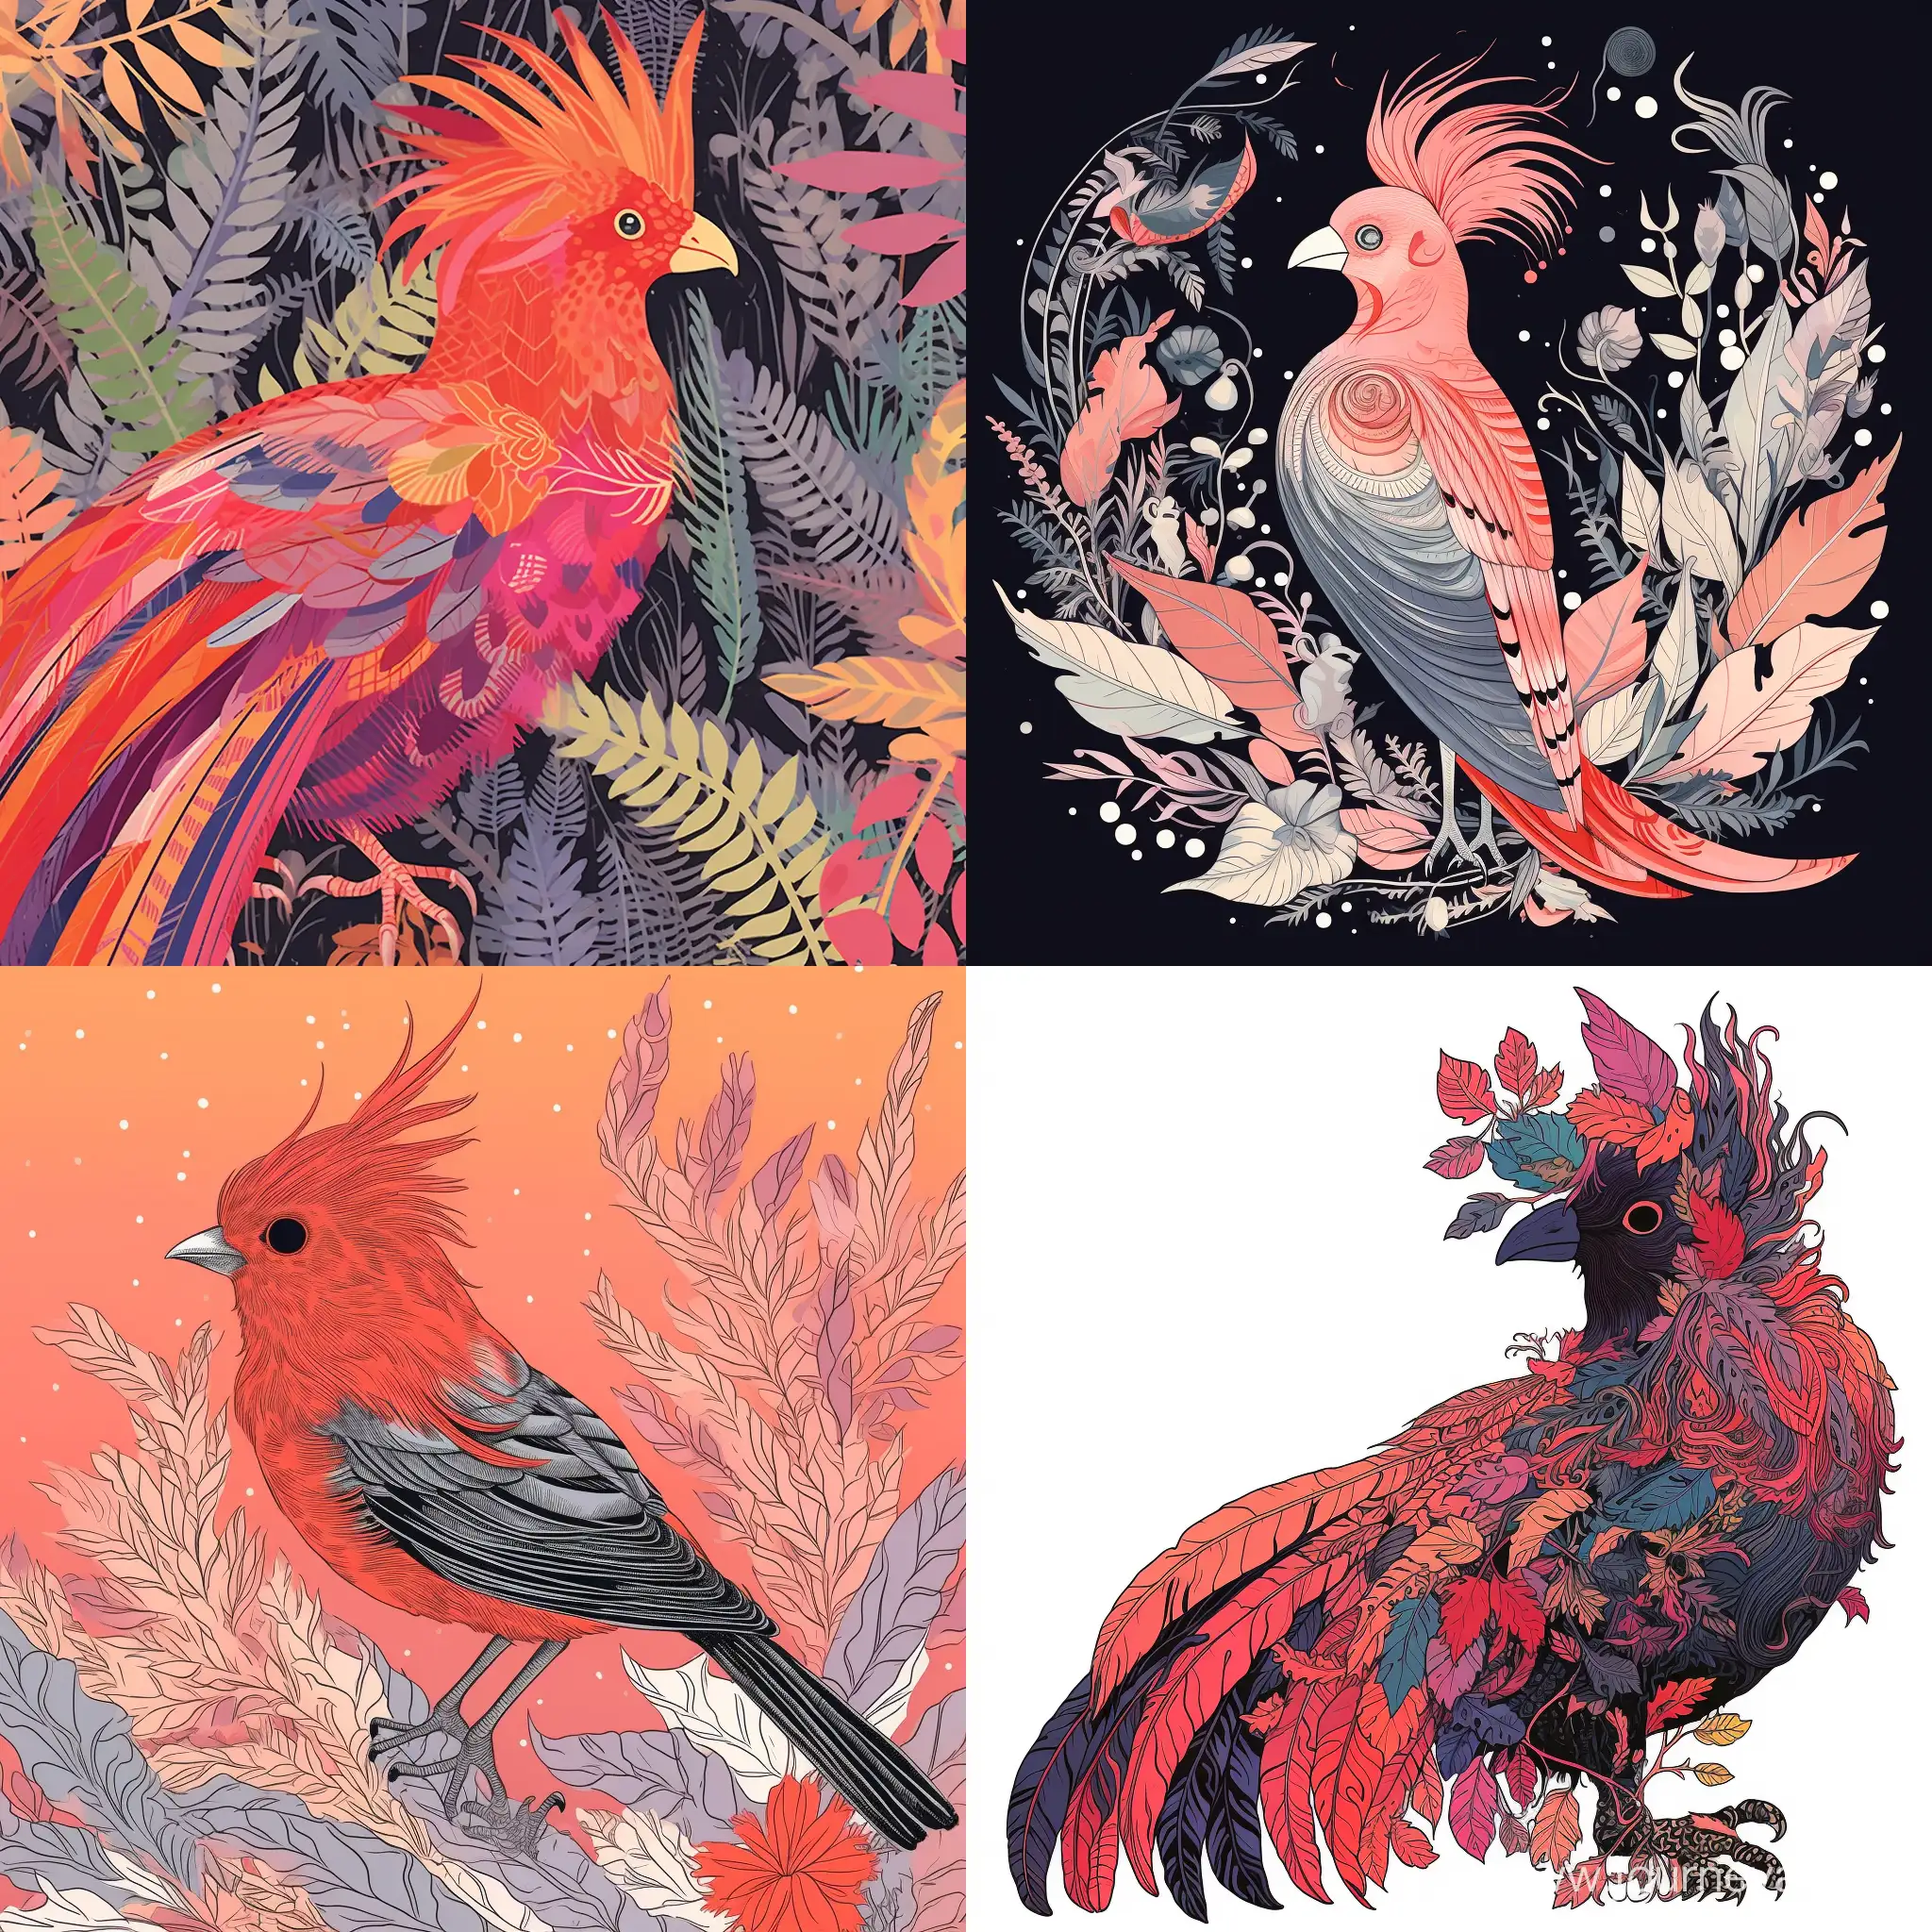 Vibrant-Exotic-Bird-with-Intricate-Feathers-Tillie-Walden-Style-Art